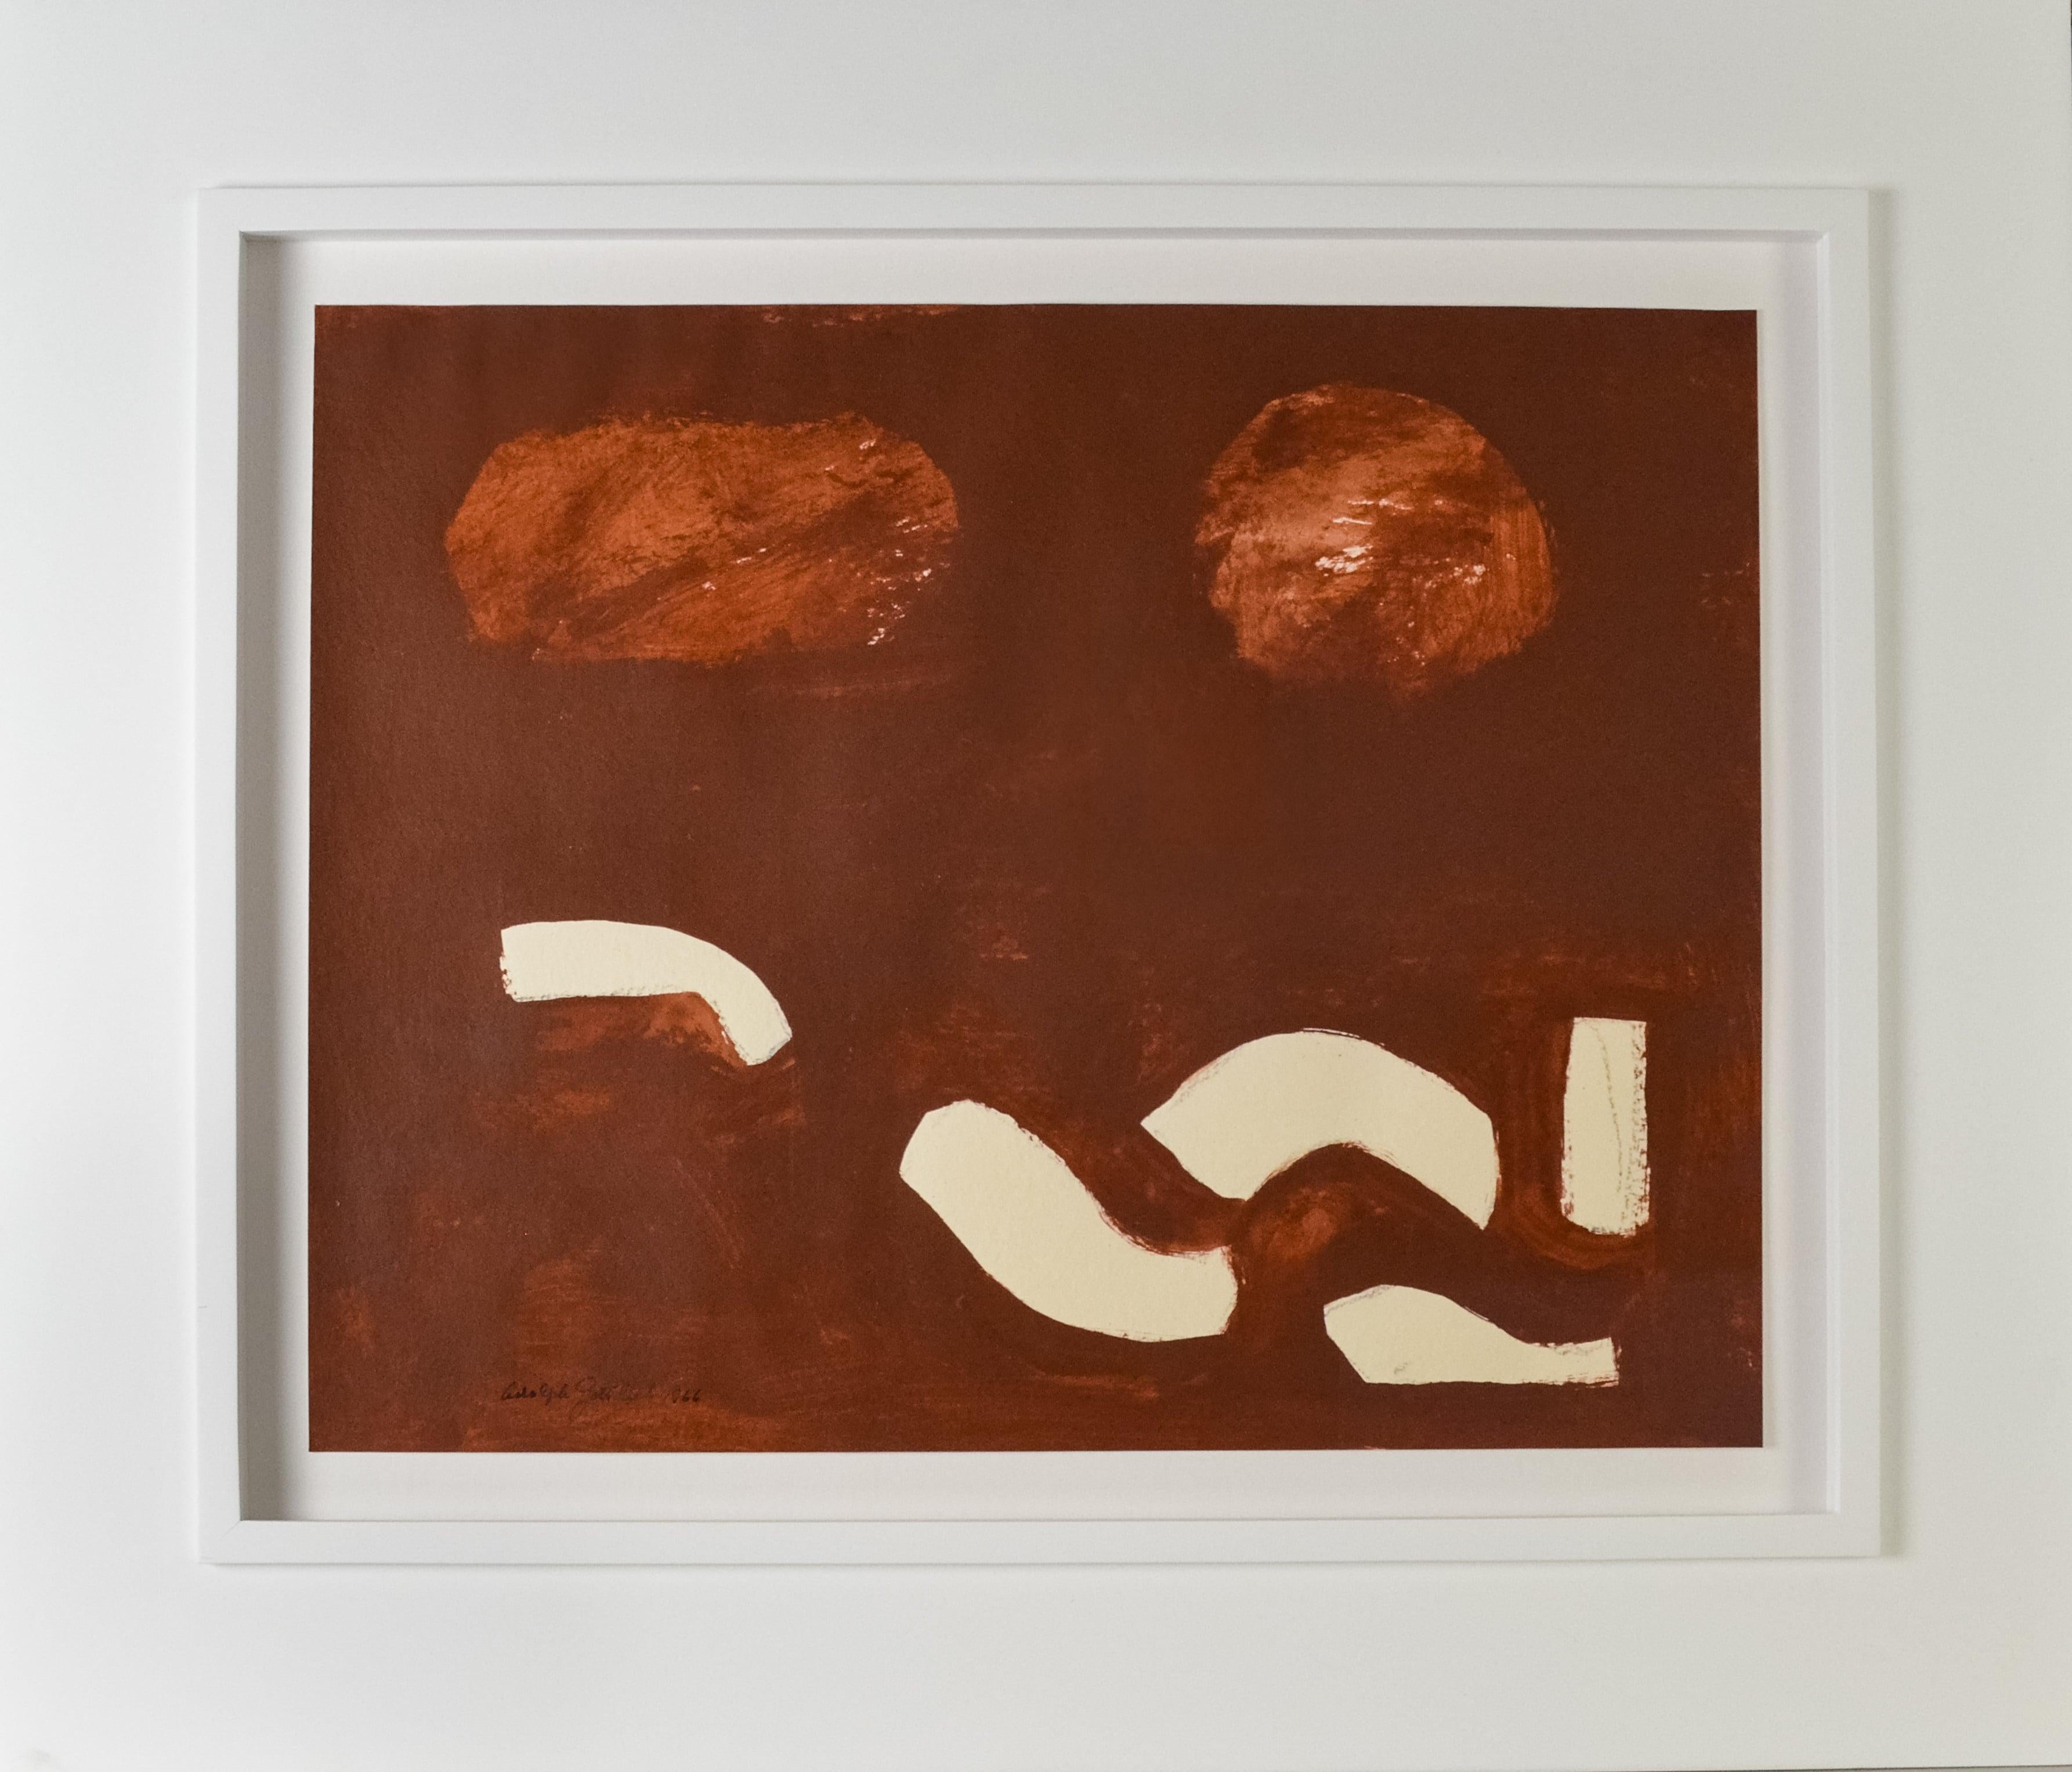 Adolph Gottlieb (1903-1974)
Untitled, 1966
Acrylic on paper
19 x 24 inches
Signed and dated lower left
This work is catalogued at the Adolph and Esther Gottlieb Foundation as #6683.

Provenance:
J. H. Duffy and Sons, Ltd., New